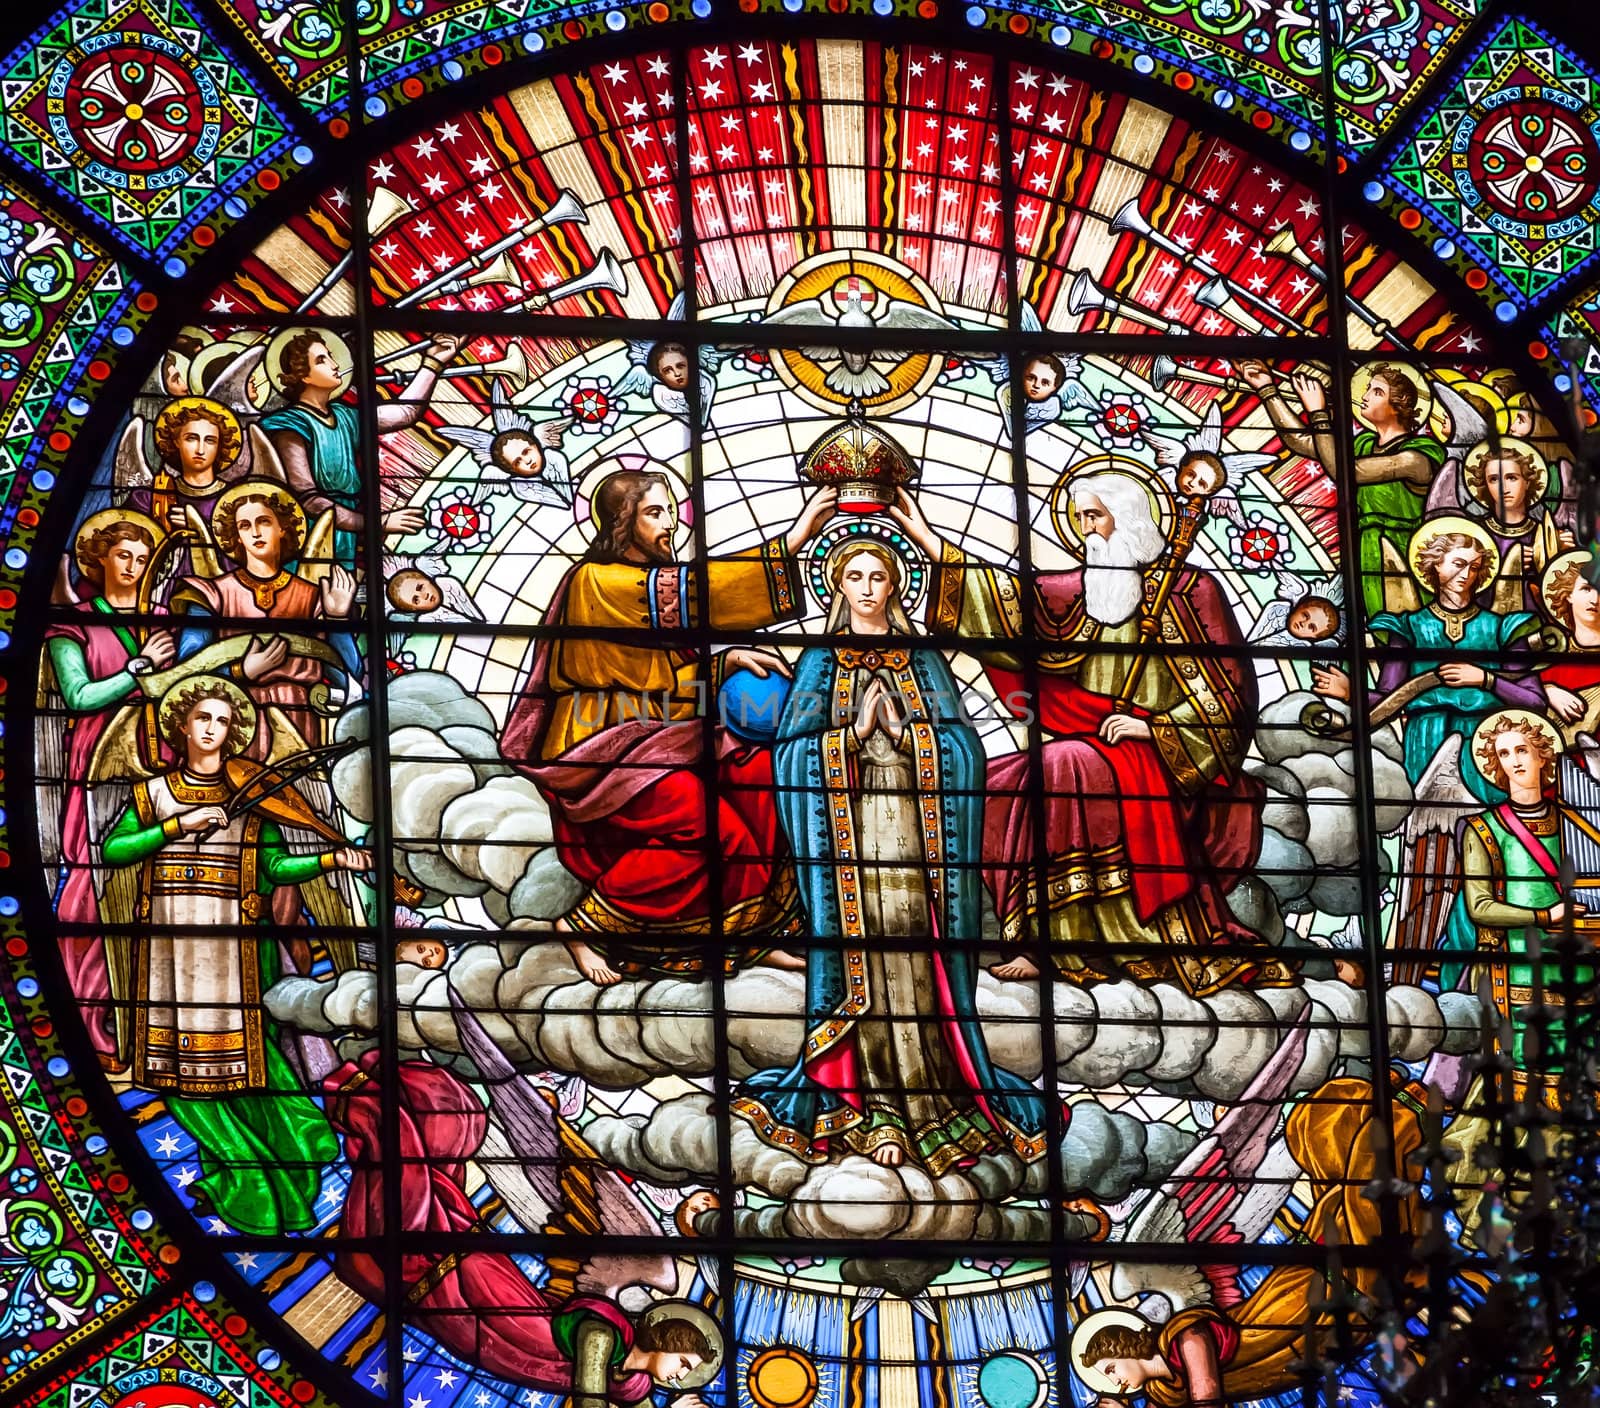 Stained glass Jesus crowning Mary angels God the father in rose window basilica inside Monestir Monastery of Montserrat, Barcelona, Catolonia, Spain.  Founded in the 9th Century, destroyed in 1811 when French invaded Spain. Rebuilt in 1844 and now a Benedictine Monastery.  Placa de Santa Maria